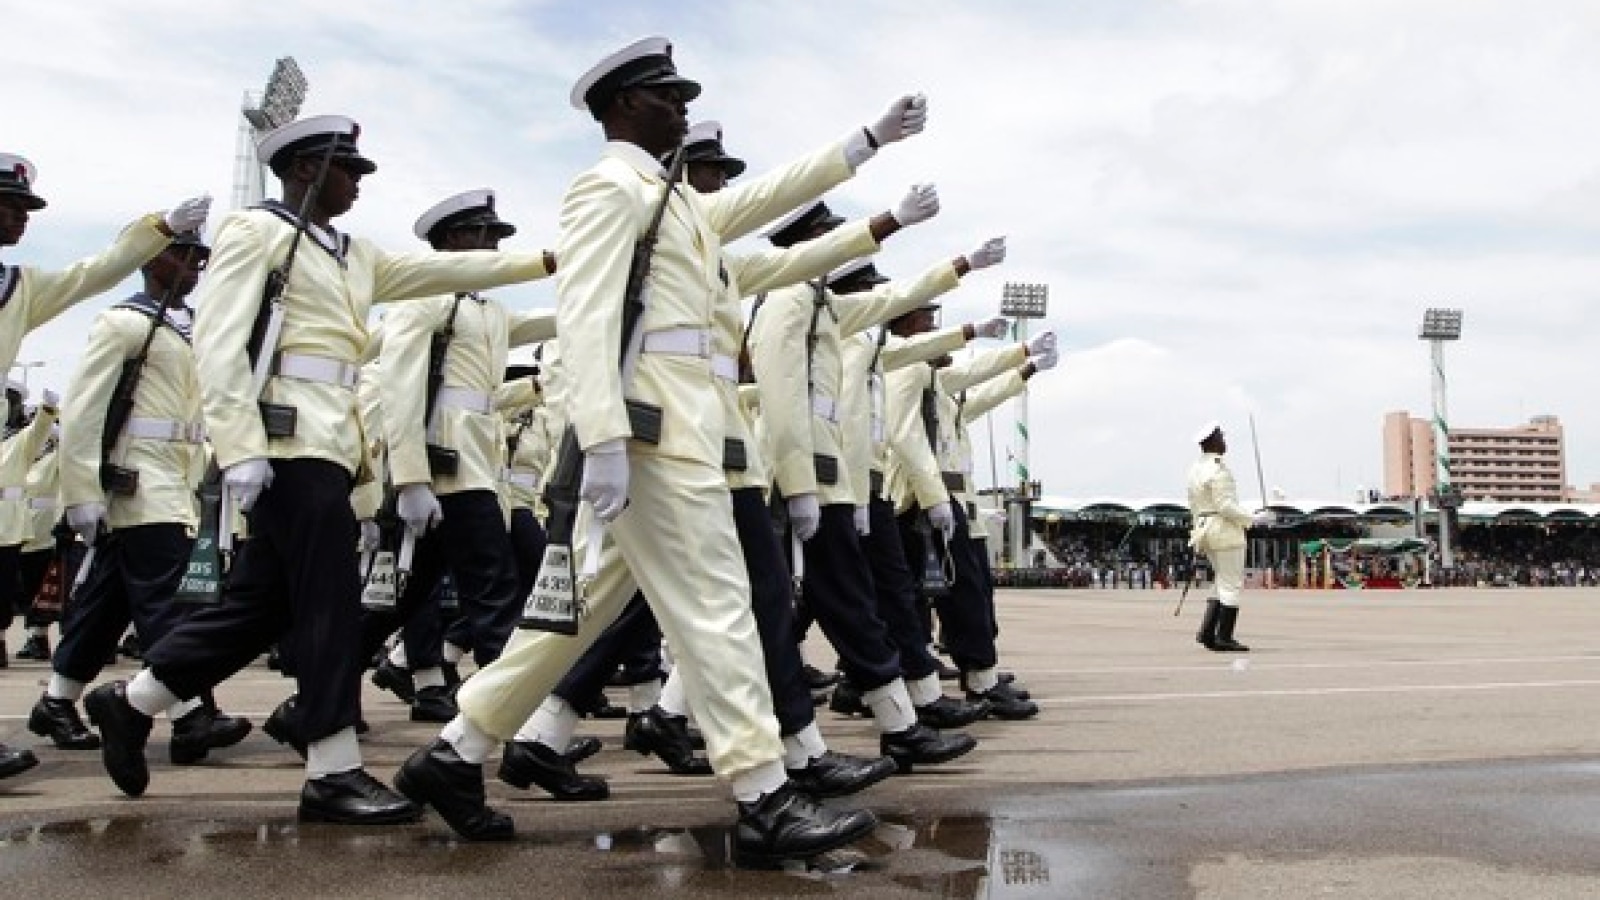 nigerian-navy-2018-19-dssc-recruitment-form-for-graduates-how-to-apply-on-joinnigeriannavy